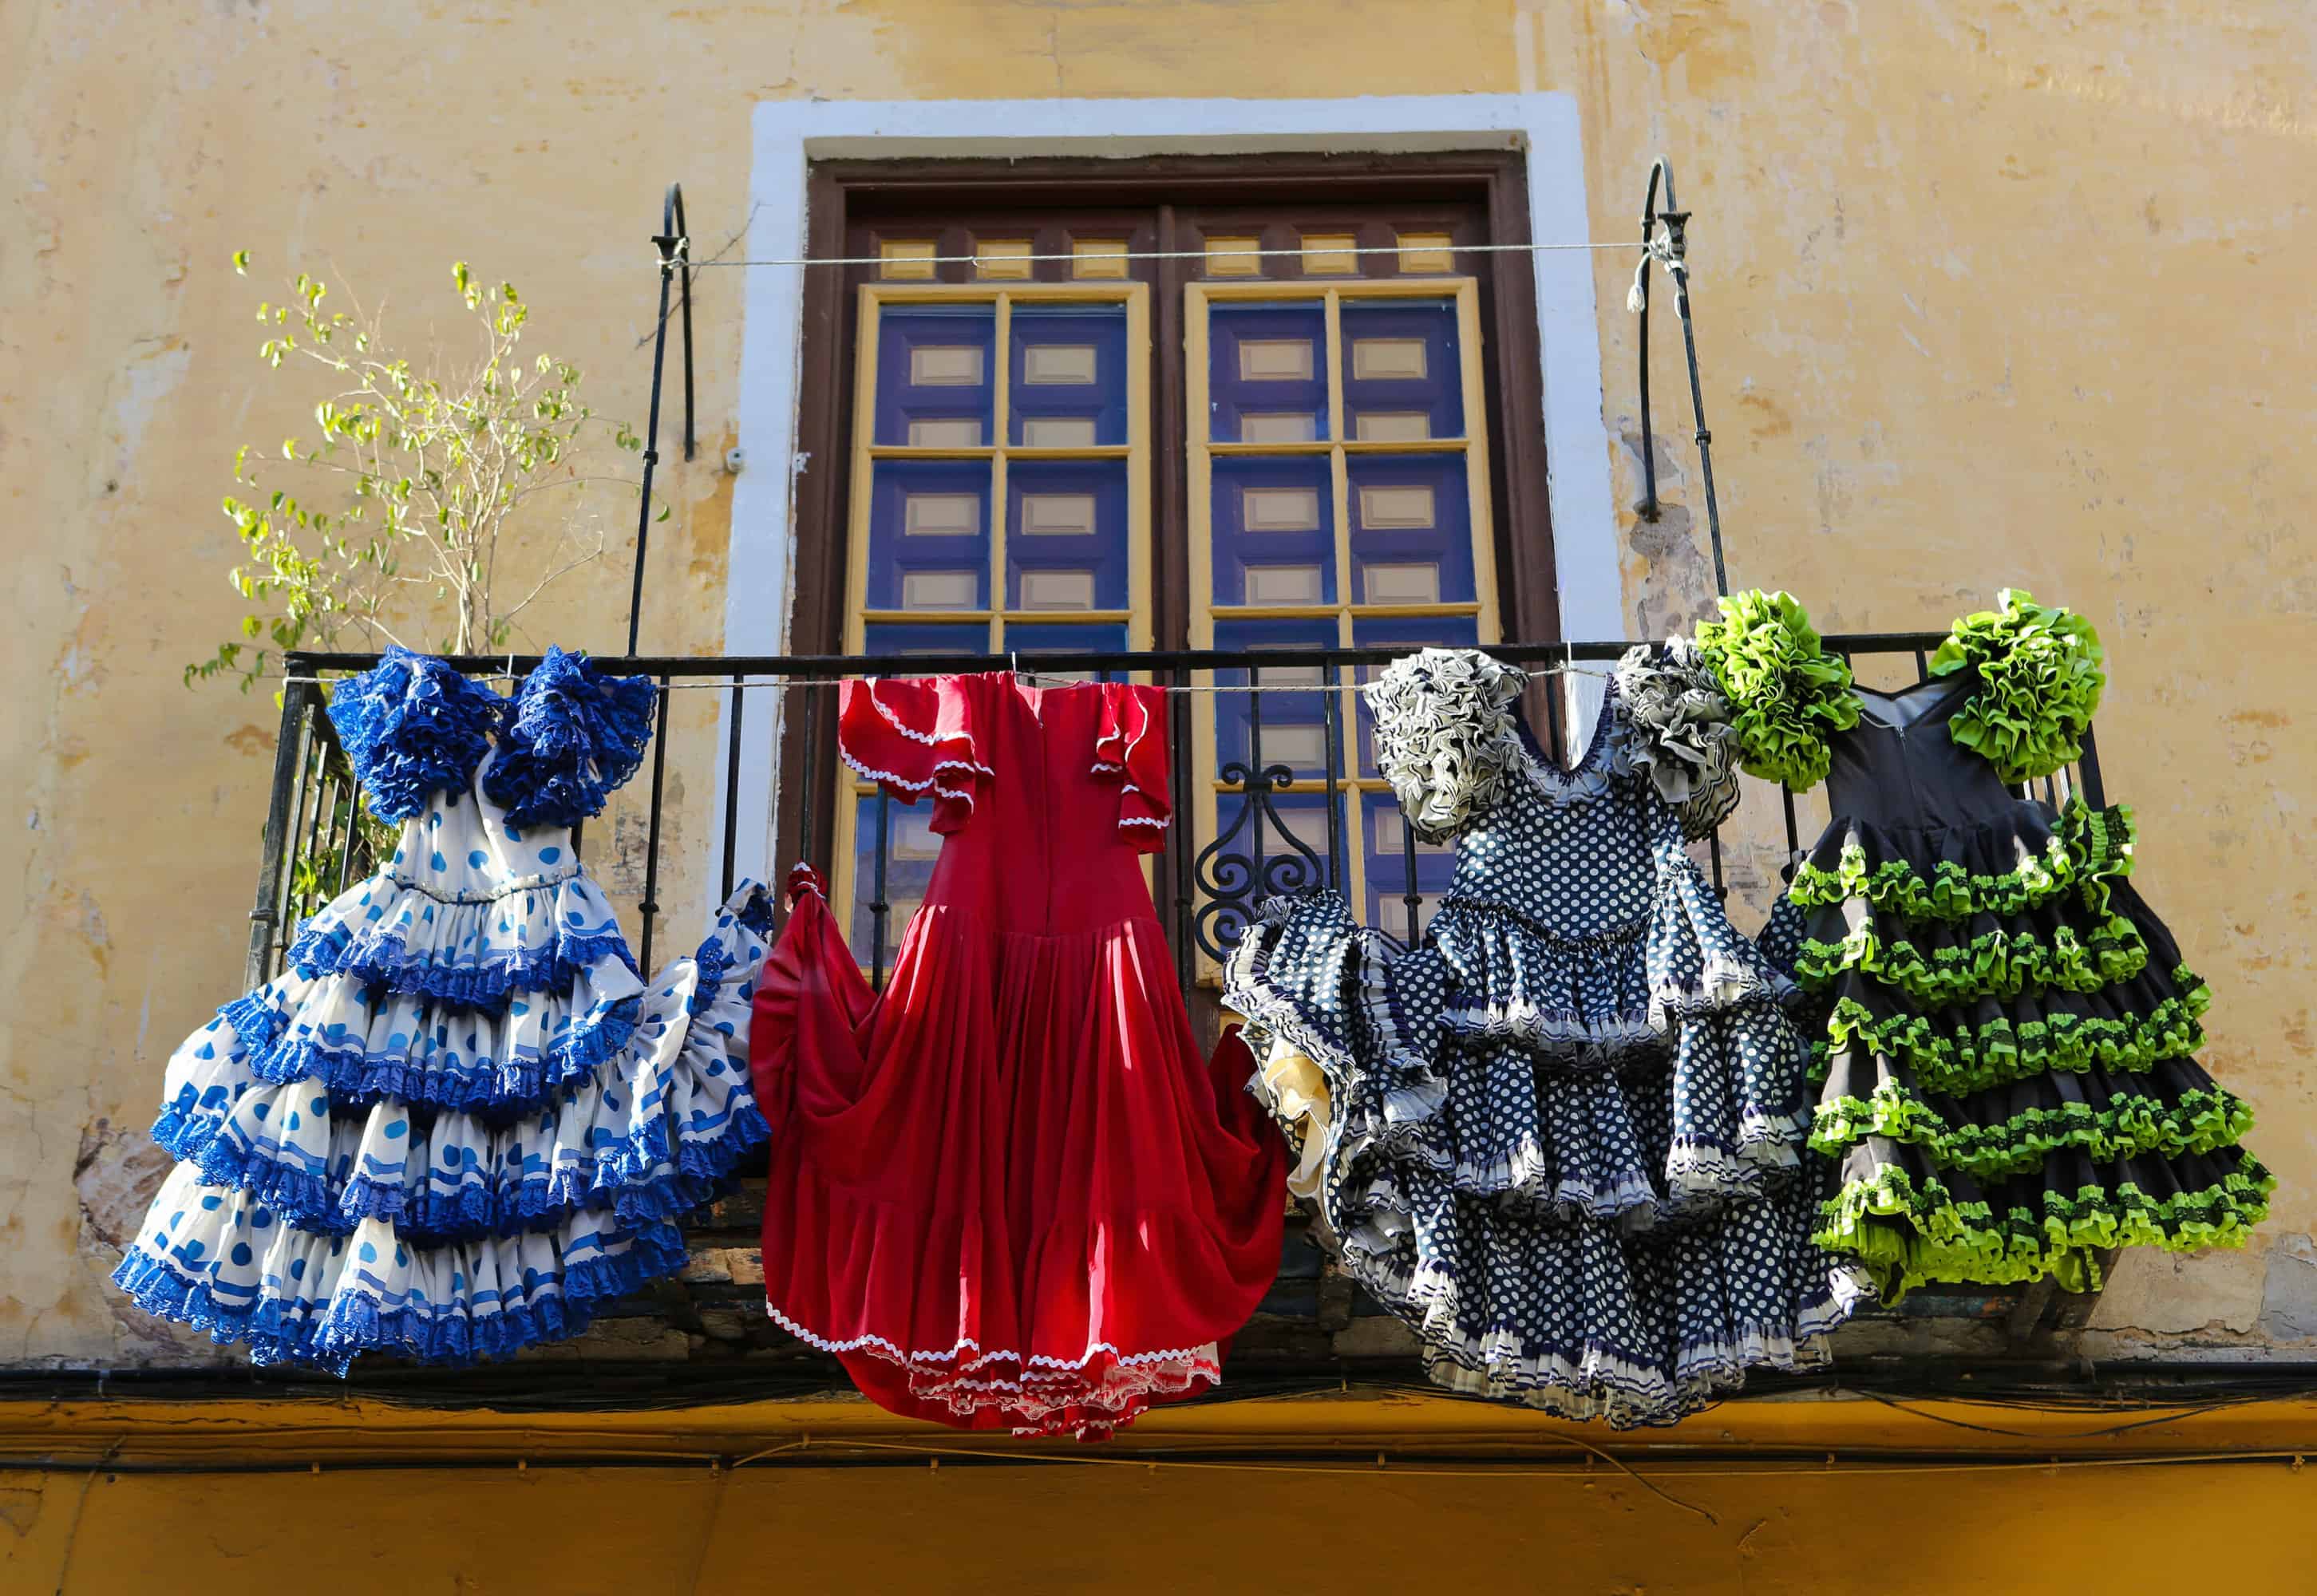 Flamenco dresses hanging from a balcony.